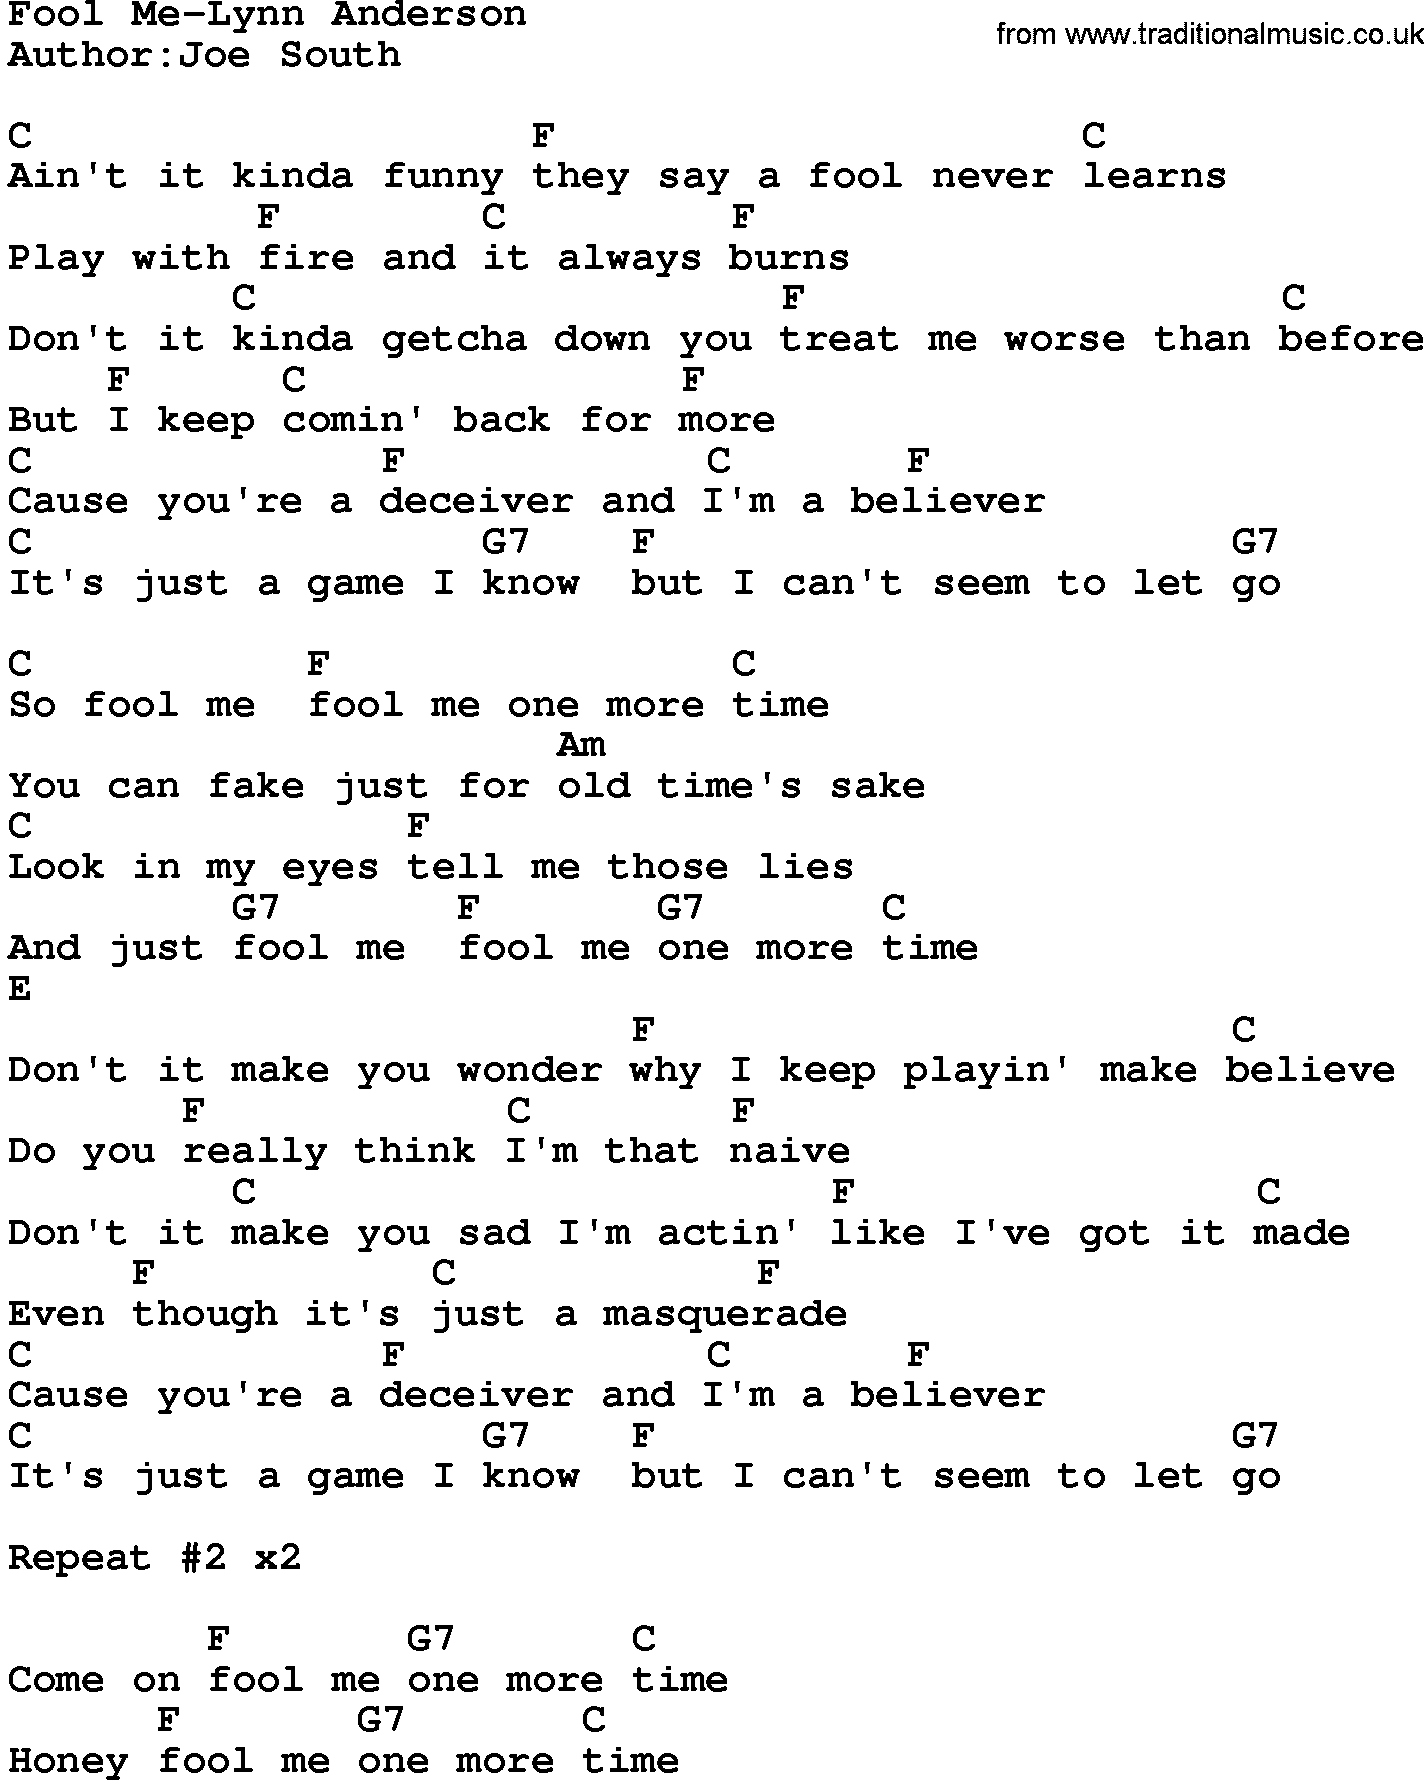 Country music song: Fool Me-Lynn Anderson lyrics and chords